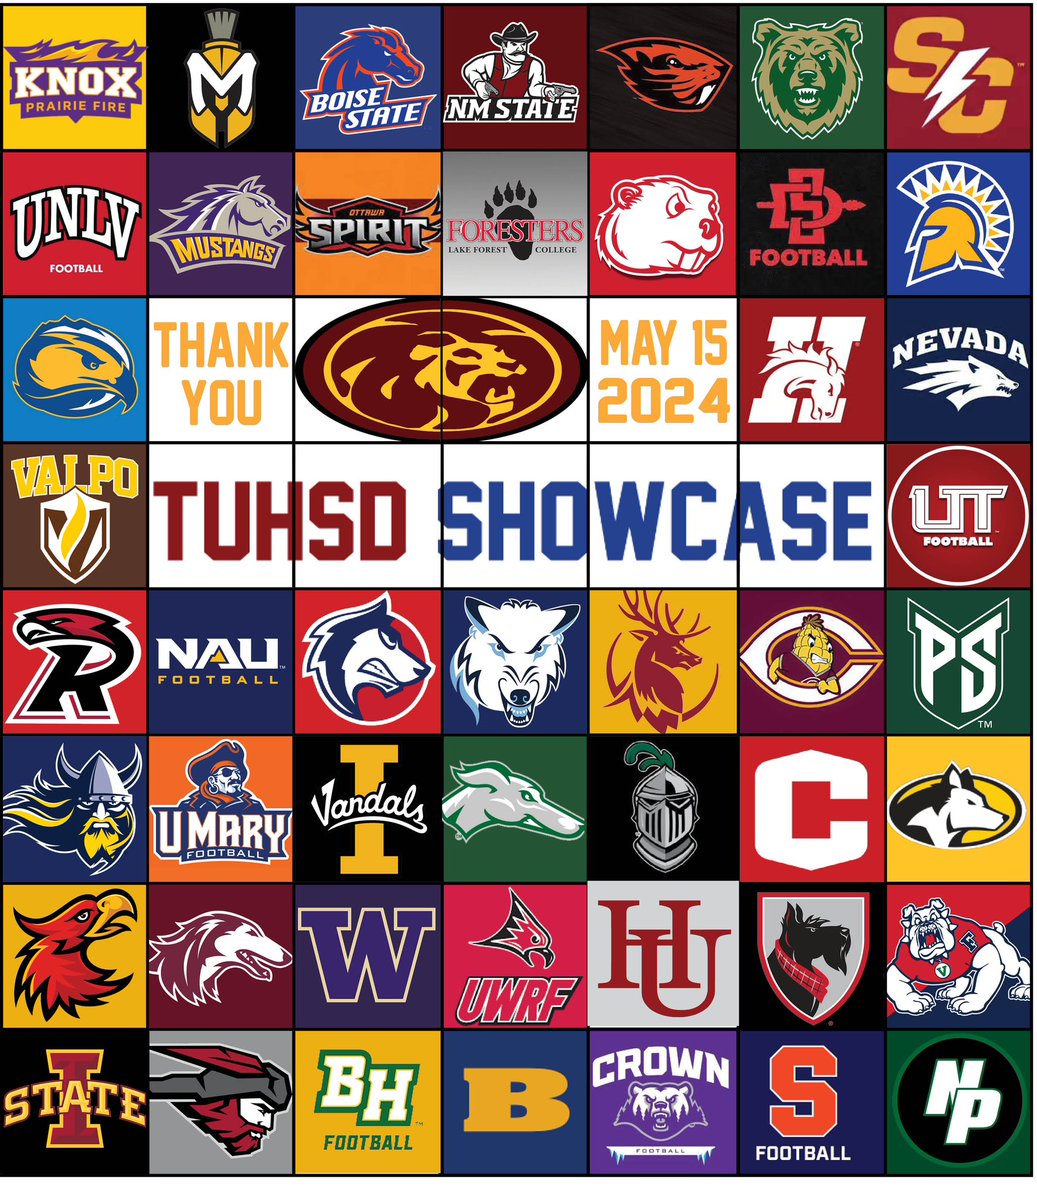 Big thanks to the 70+ Coaches and 50+ Universities that attended our TUHSD Showcase!! #ROLLPR1DE #ETC #WSN